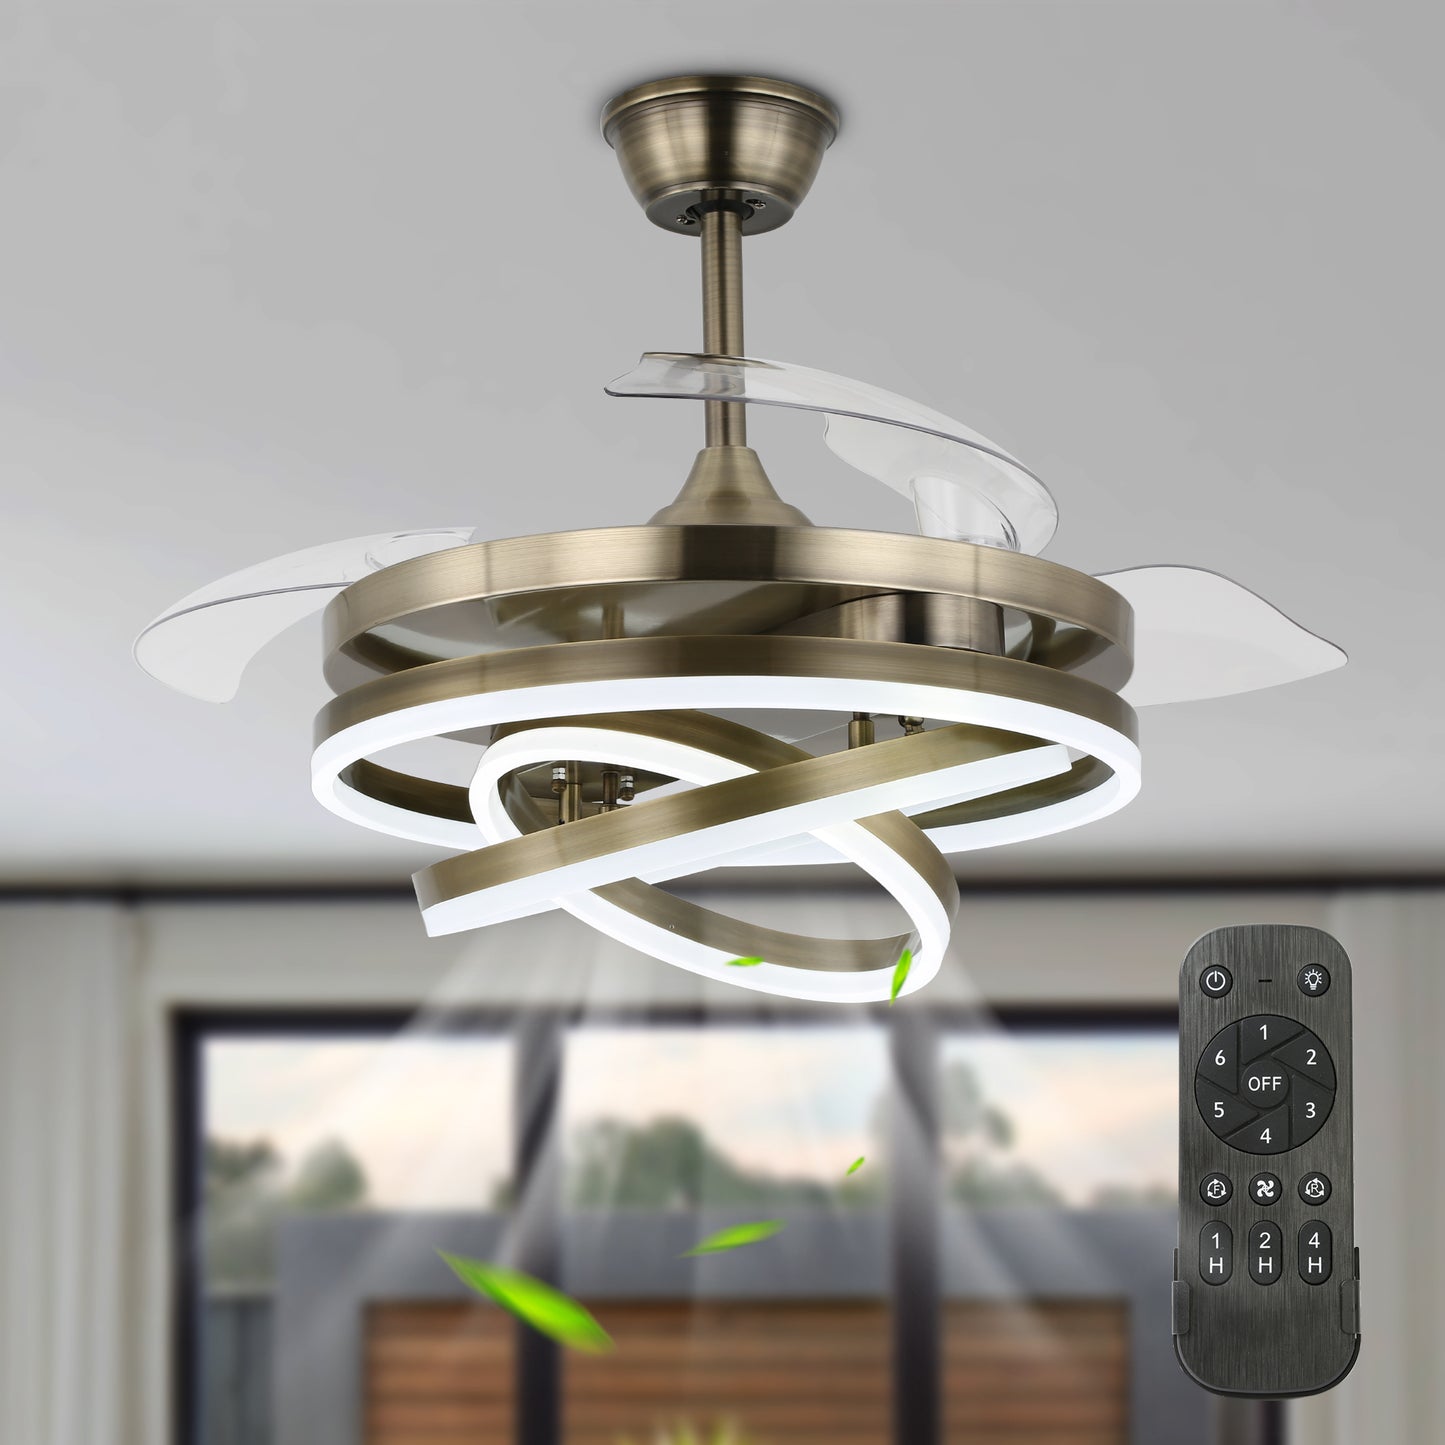 42" Indoor Modern Retractable LED Ceiling Fan with Remote Control and Dimmable Light